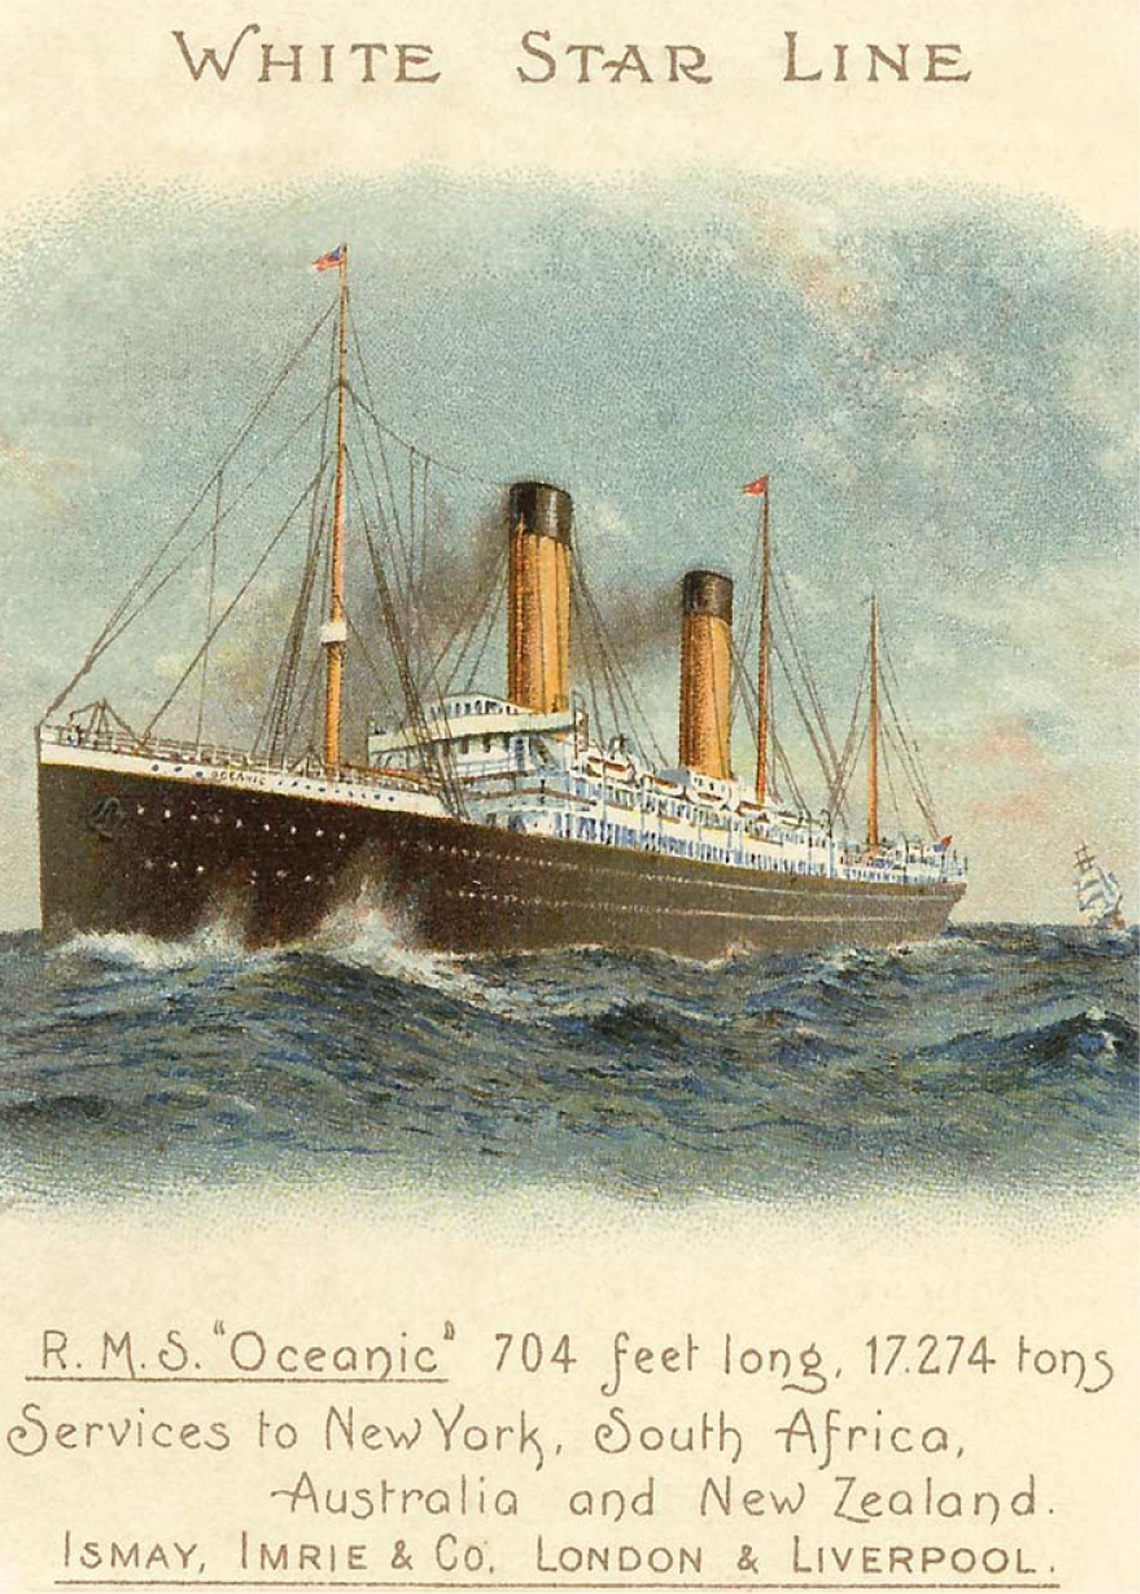 An advertisement for the White Star liner Oceanic of 1899 showing her fine - photo 4